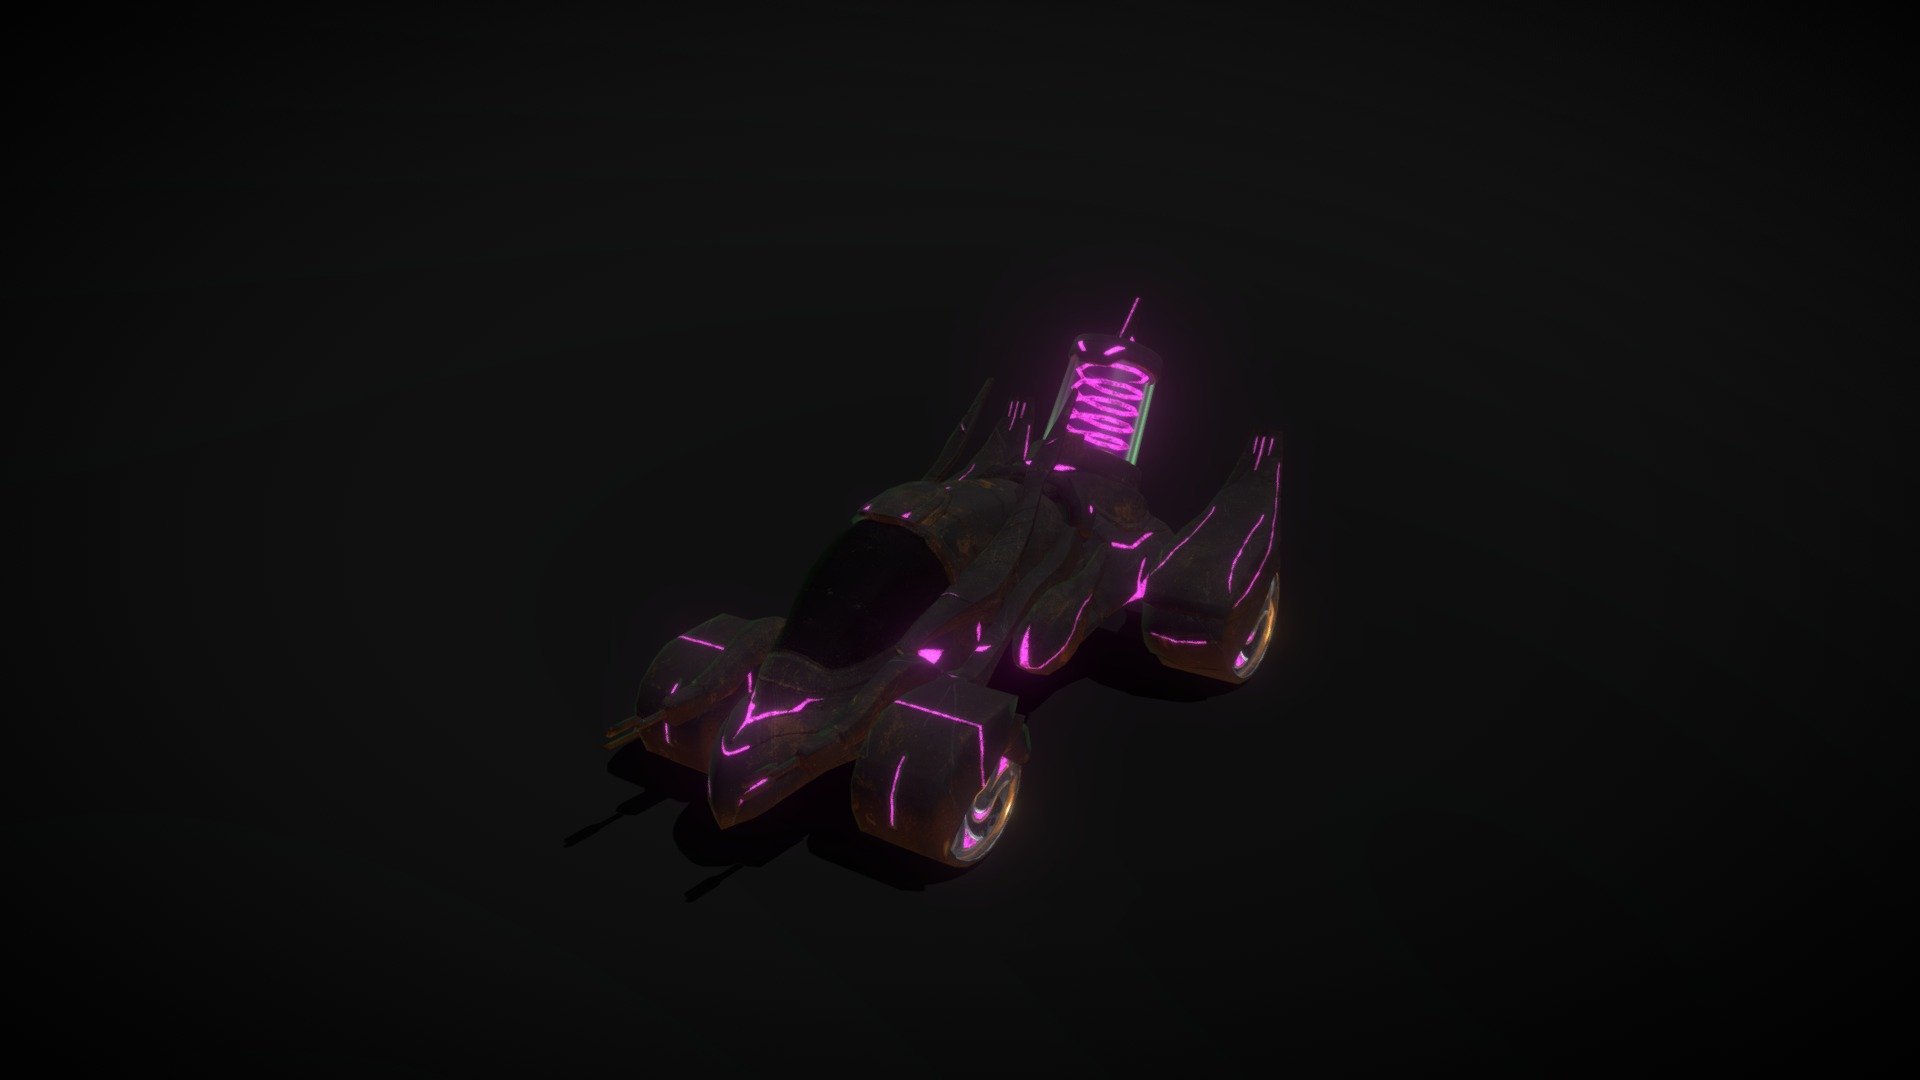 Dark Parasite is a sci-fi racing vehicle created by a malevolous team to spread viruses at competitor's vehicles while racing against them. This is the high-poly version and game-development ready. The model has pieces separated for suspension and wheel that can be configured on game engines 3d model